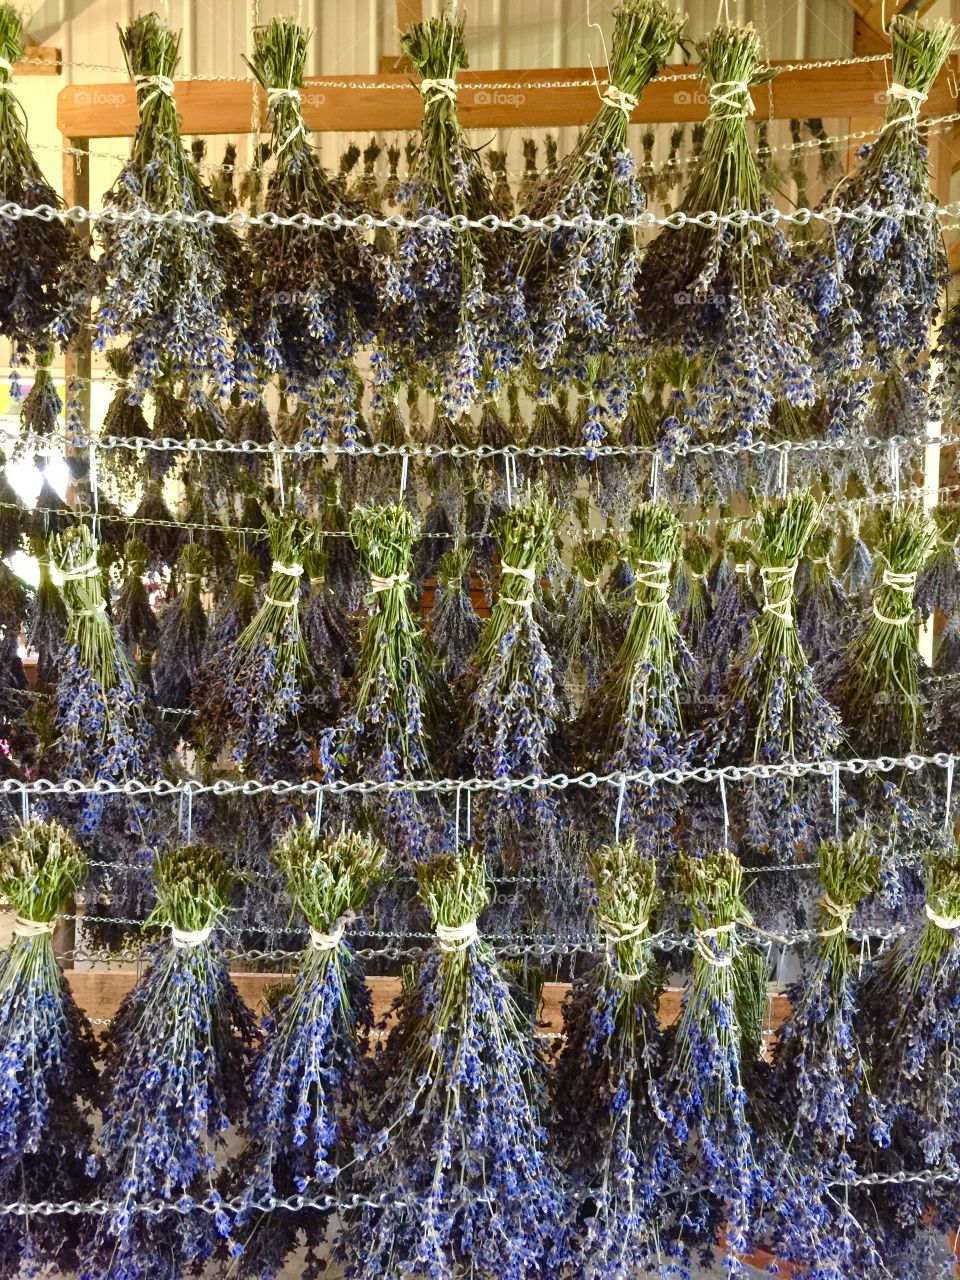 Rows of organic lavender bunches hanging upside down to dry on racks